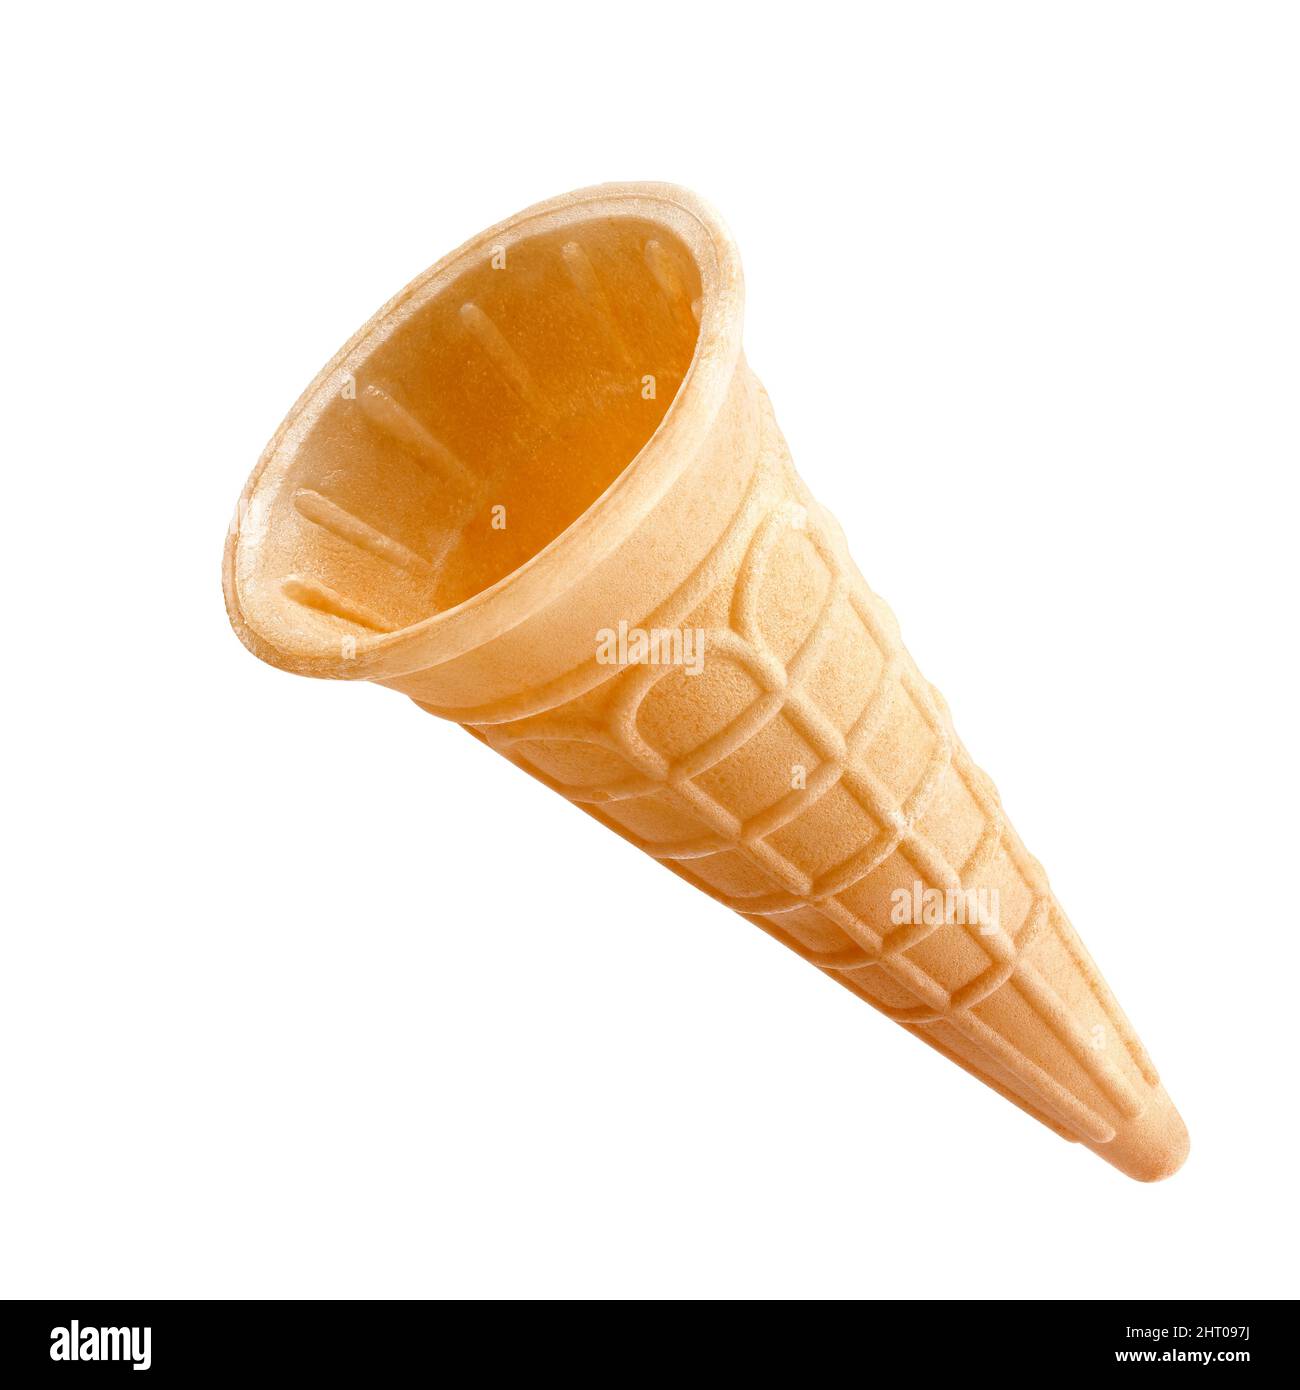 Wafer cone, empty ice cream cone isolated with clipping path included Stock Photo